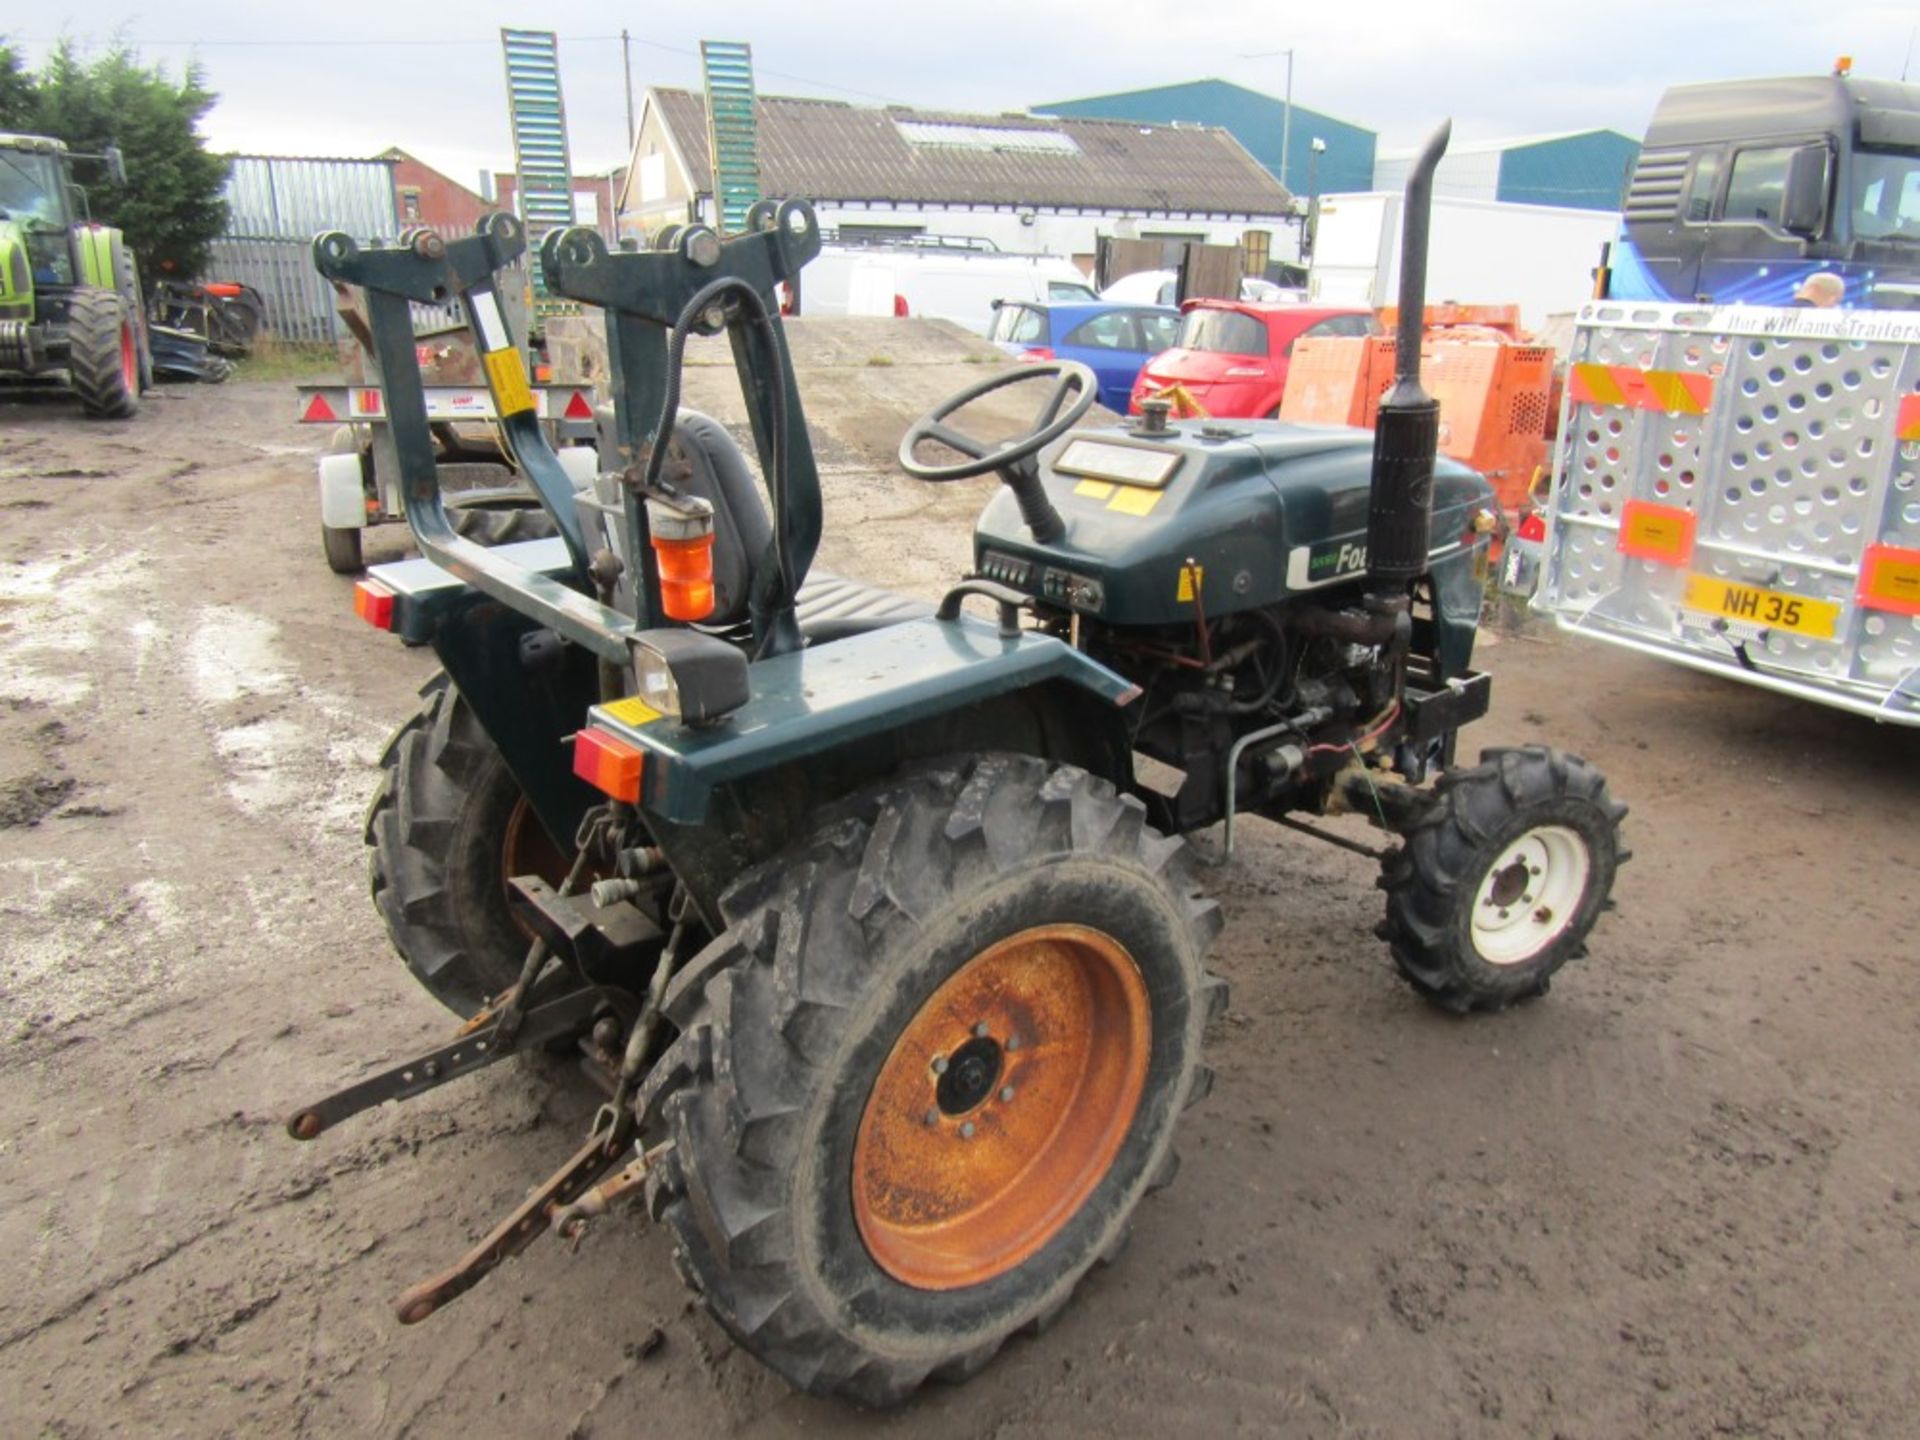 SHIRE 28hp COMPACT TRACTOR, 623 HOURS [NO VAT] - Image 3 of 5